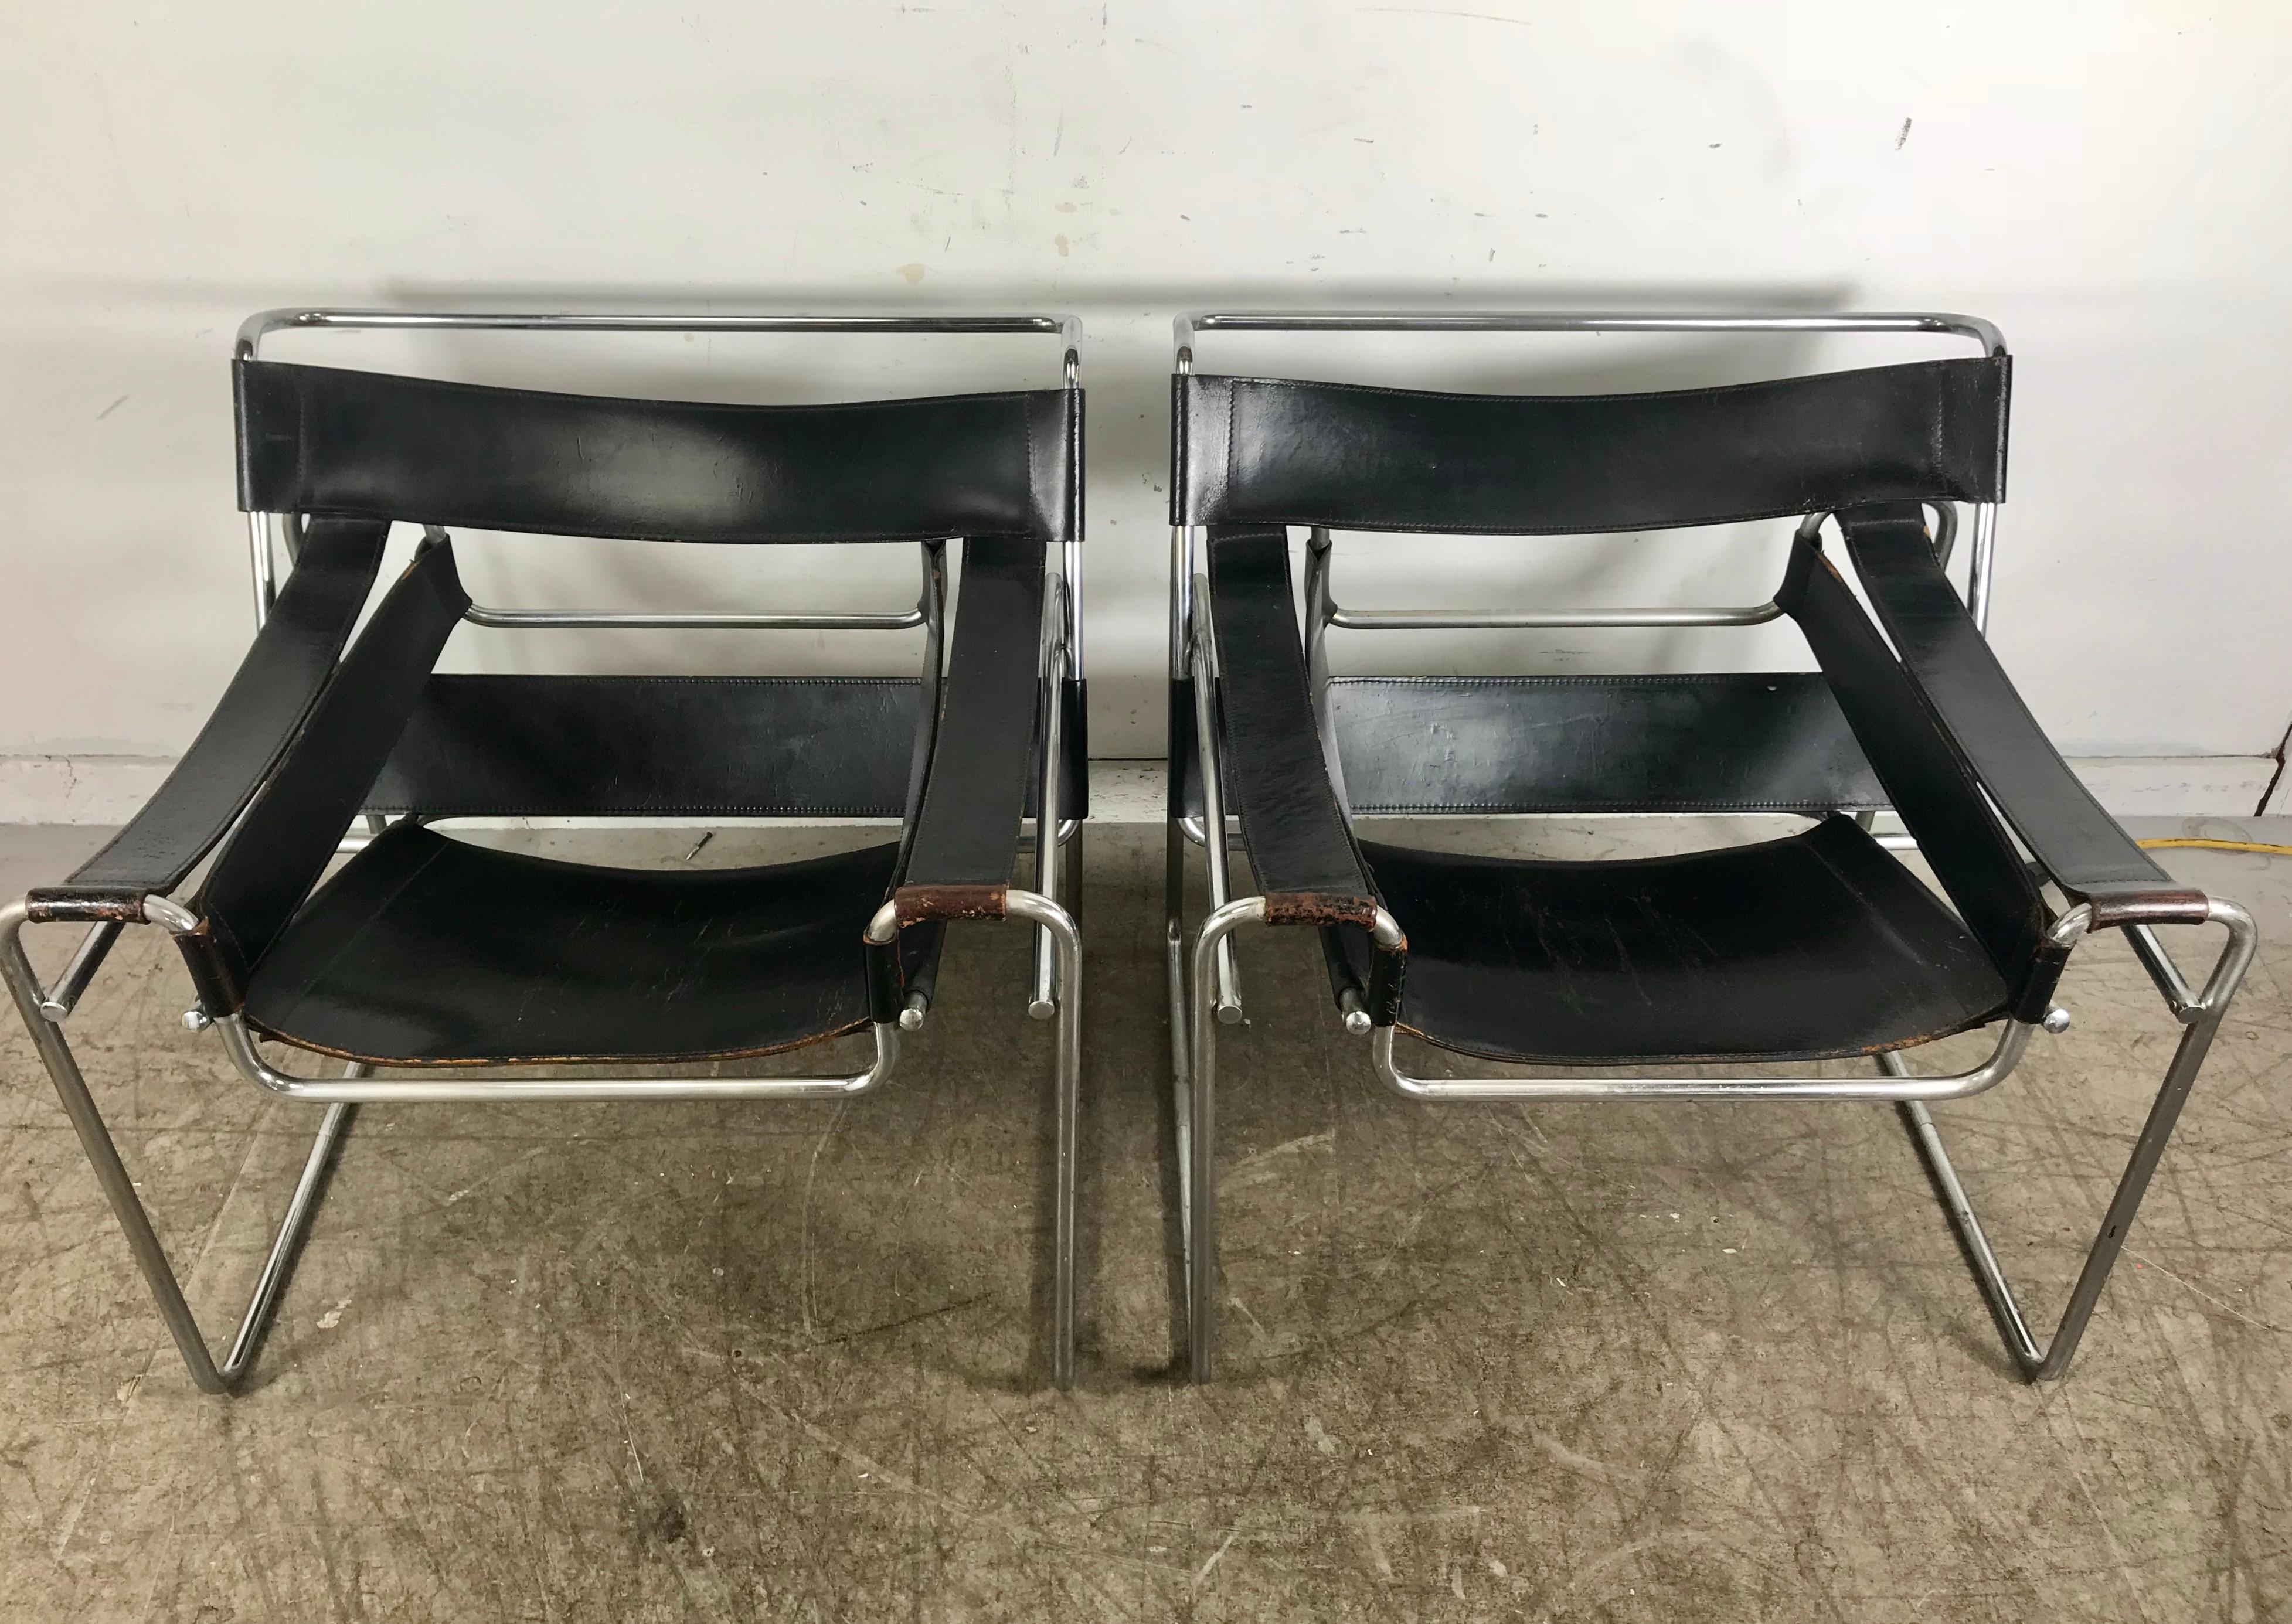 Marcel Breuer's 1925 design is a widely recognized masterpiece of modern furniture, having long ago achieved iconic status. This pair of Wassily chairs date to the 1960s.
The chromed steel frames are finely finished and have considerable heft. The